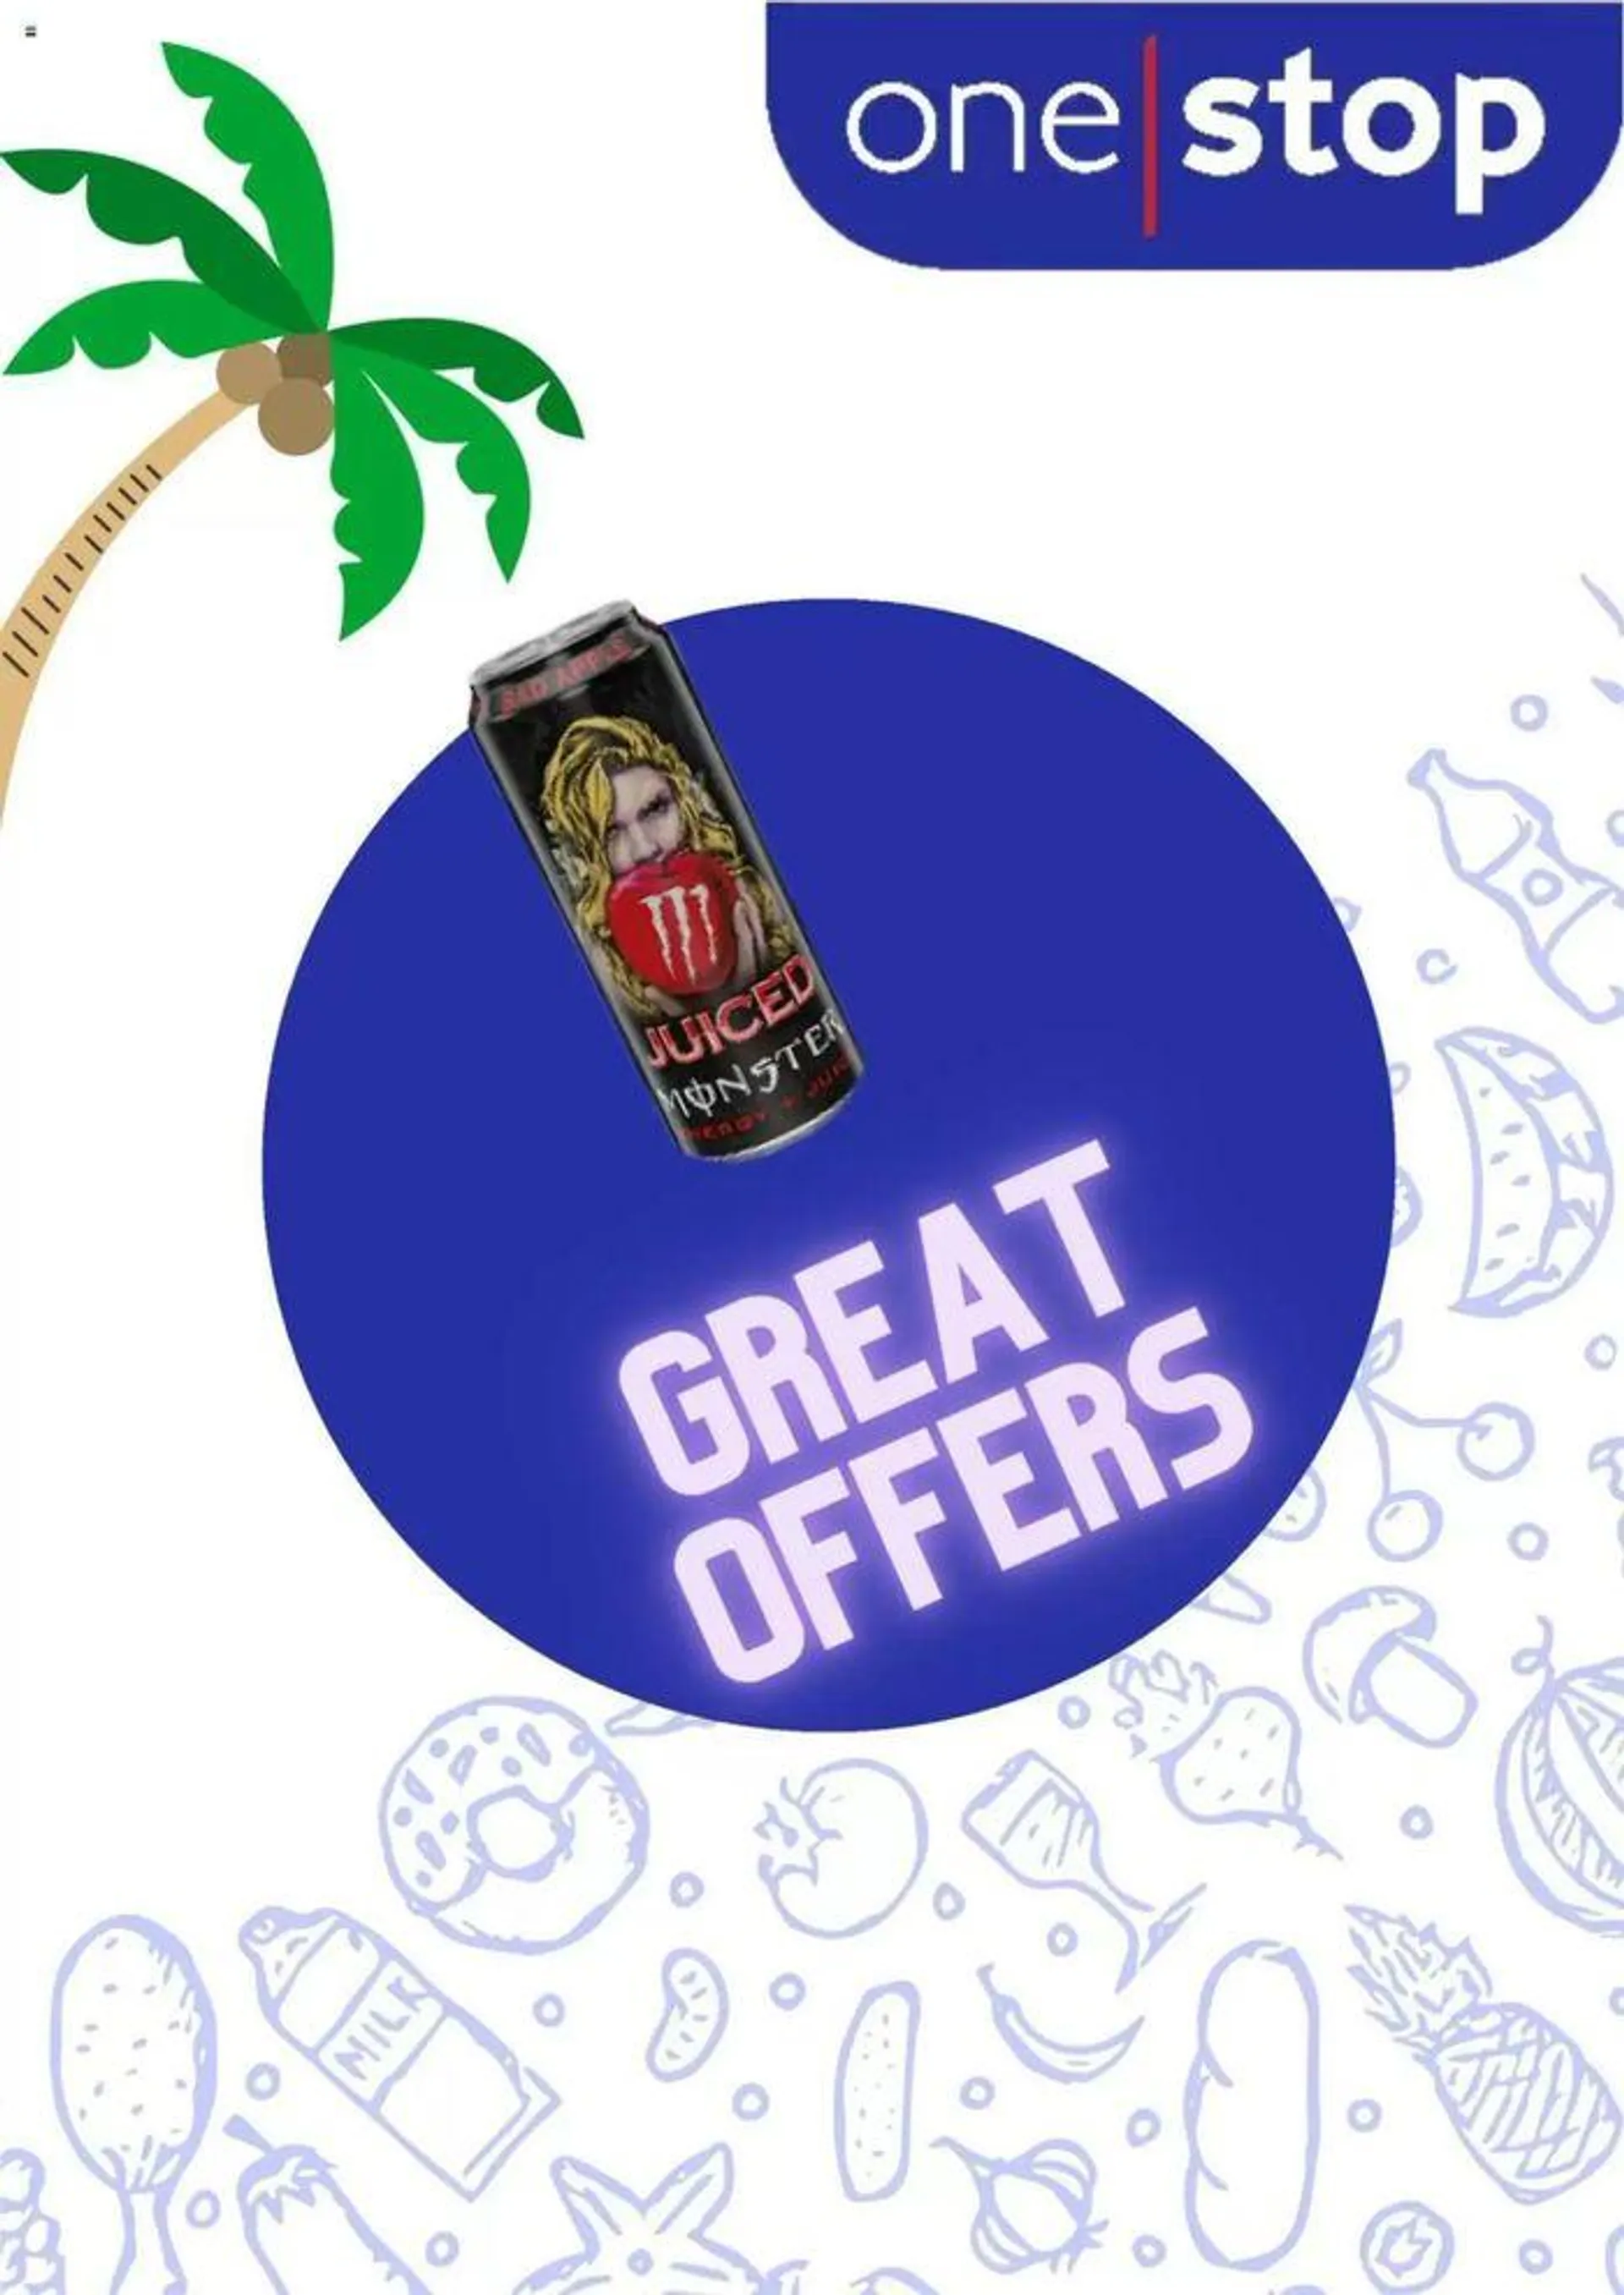 Great Offers - 1